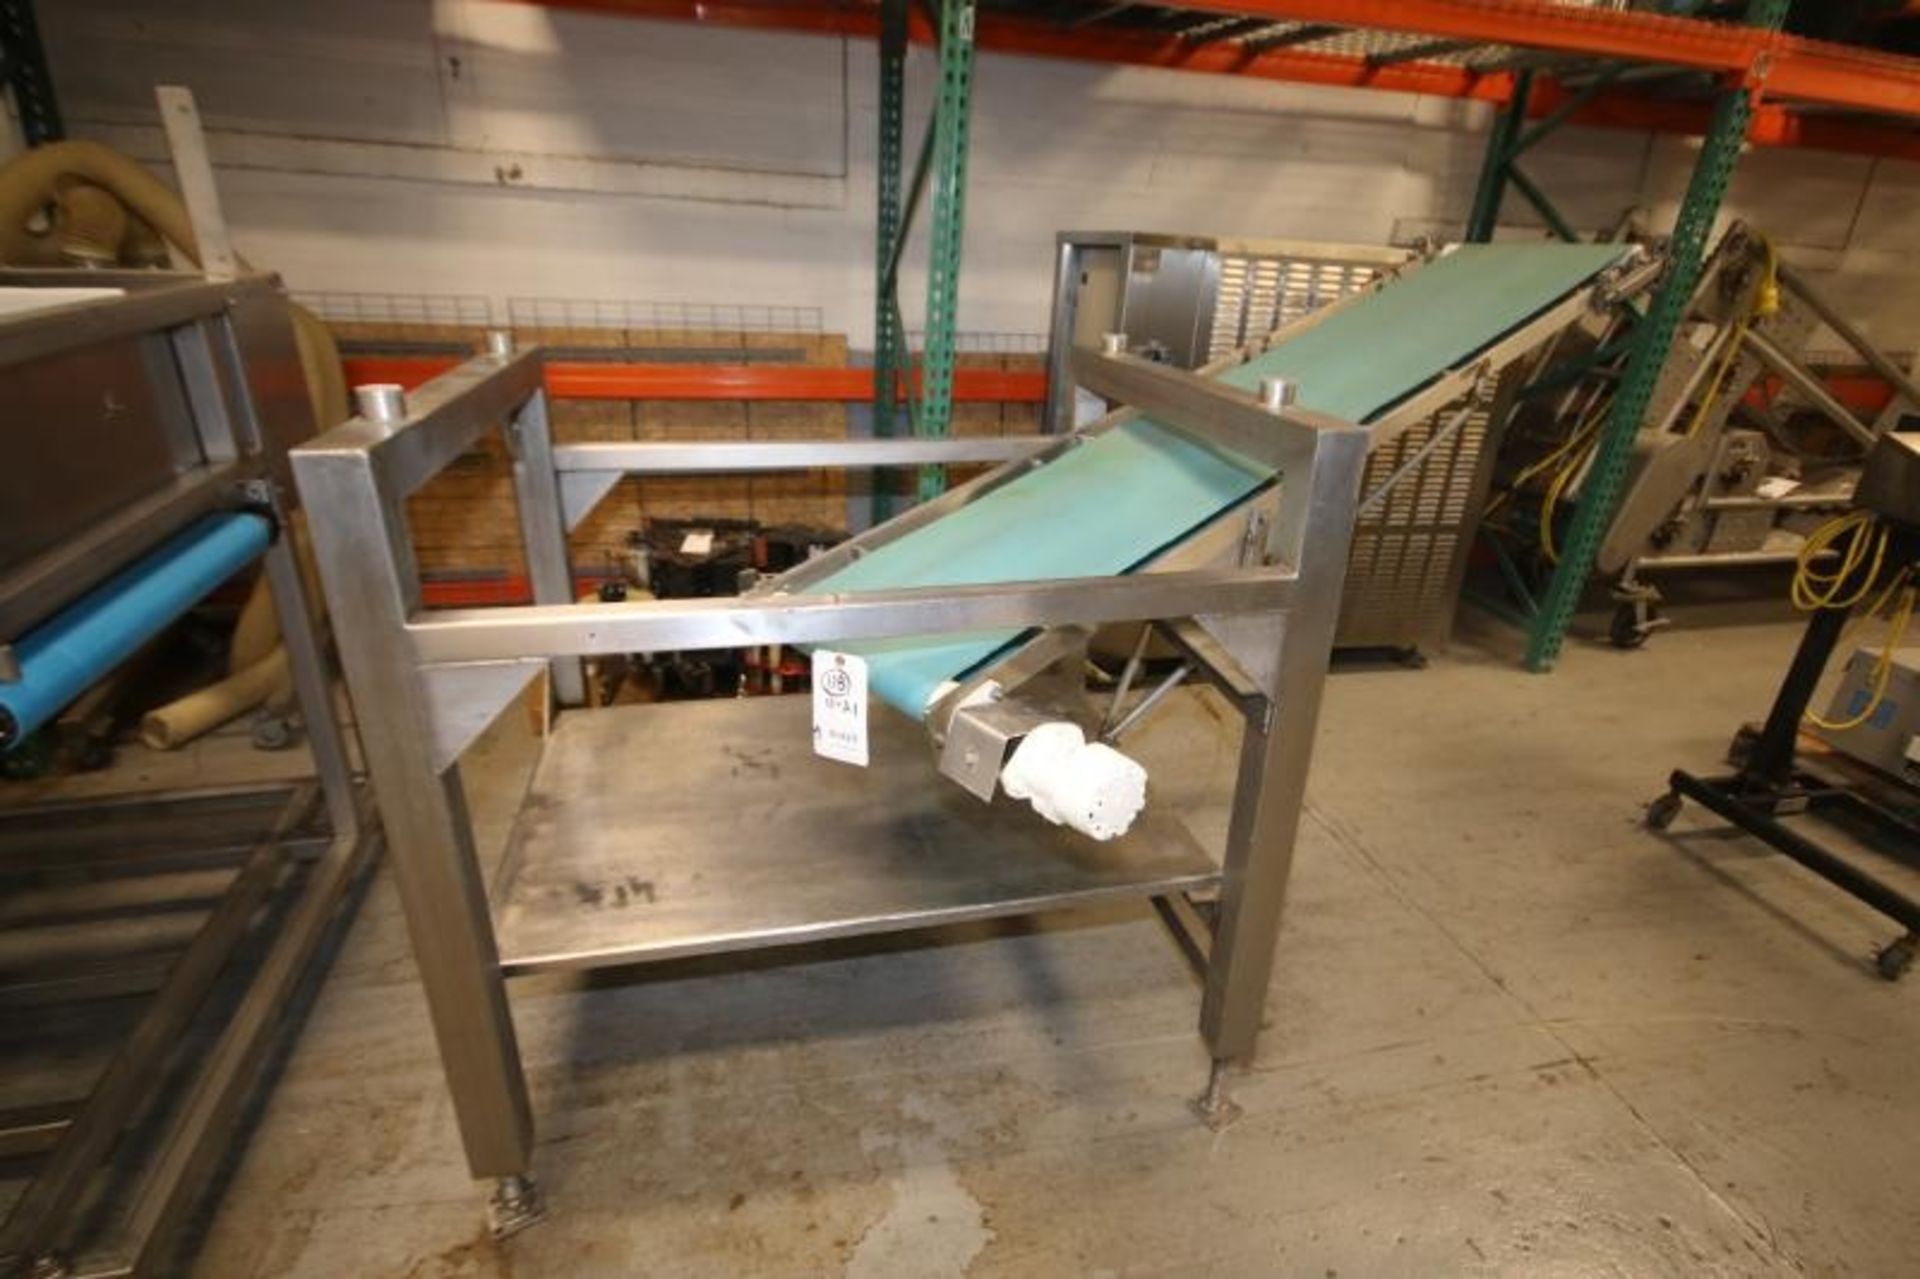 92" L x 16" W Rotating Inclined S/S Belt Conveyor System with Drive Motor, Mounted on 50" L x 42"